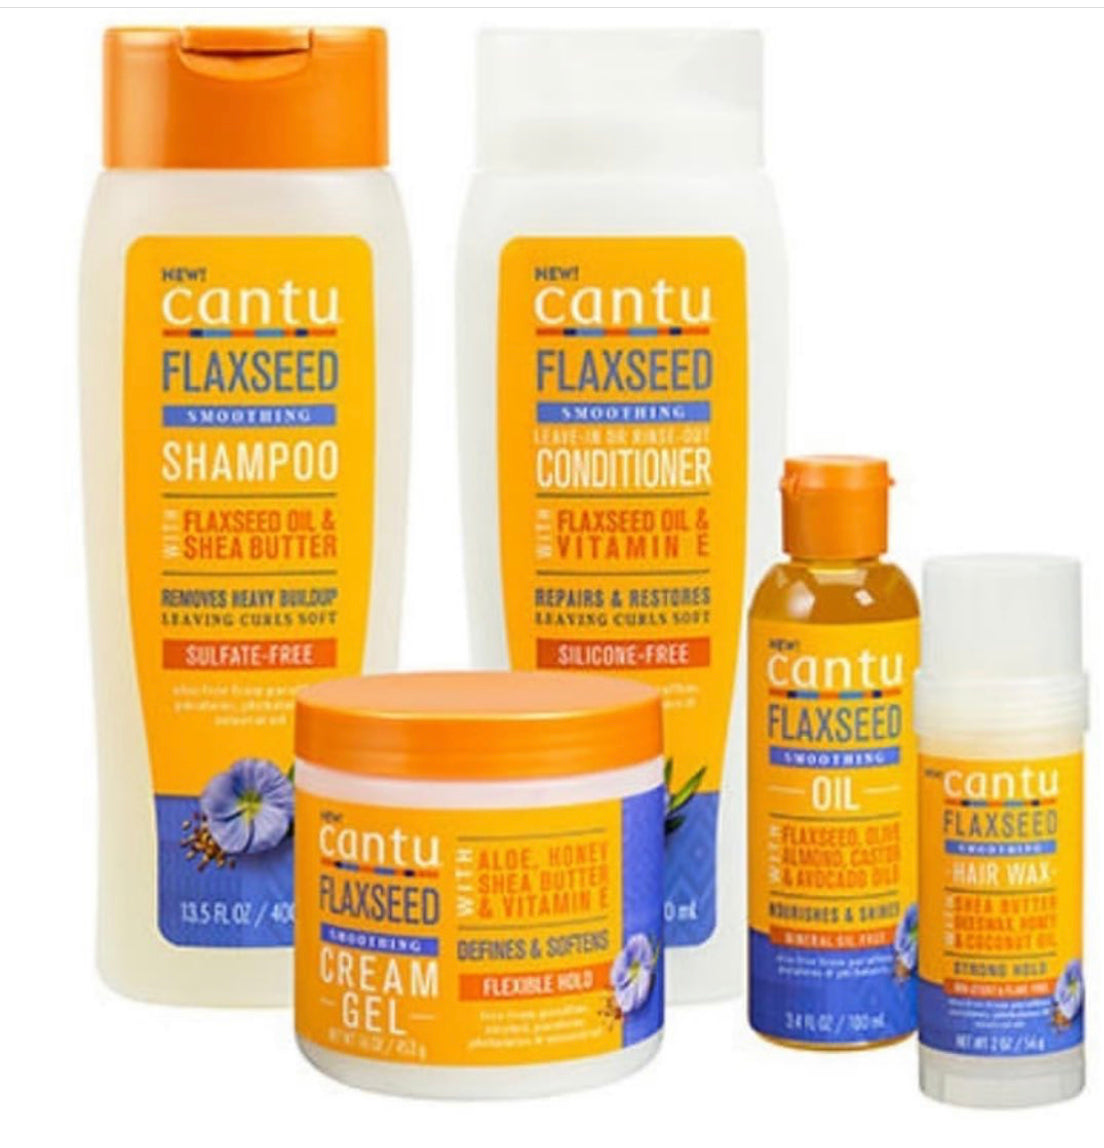 5 Reasons why you must try the NEW Cantu Flaxseed Collection